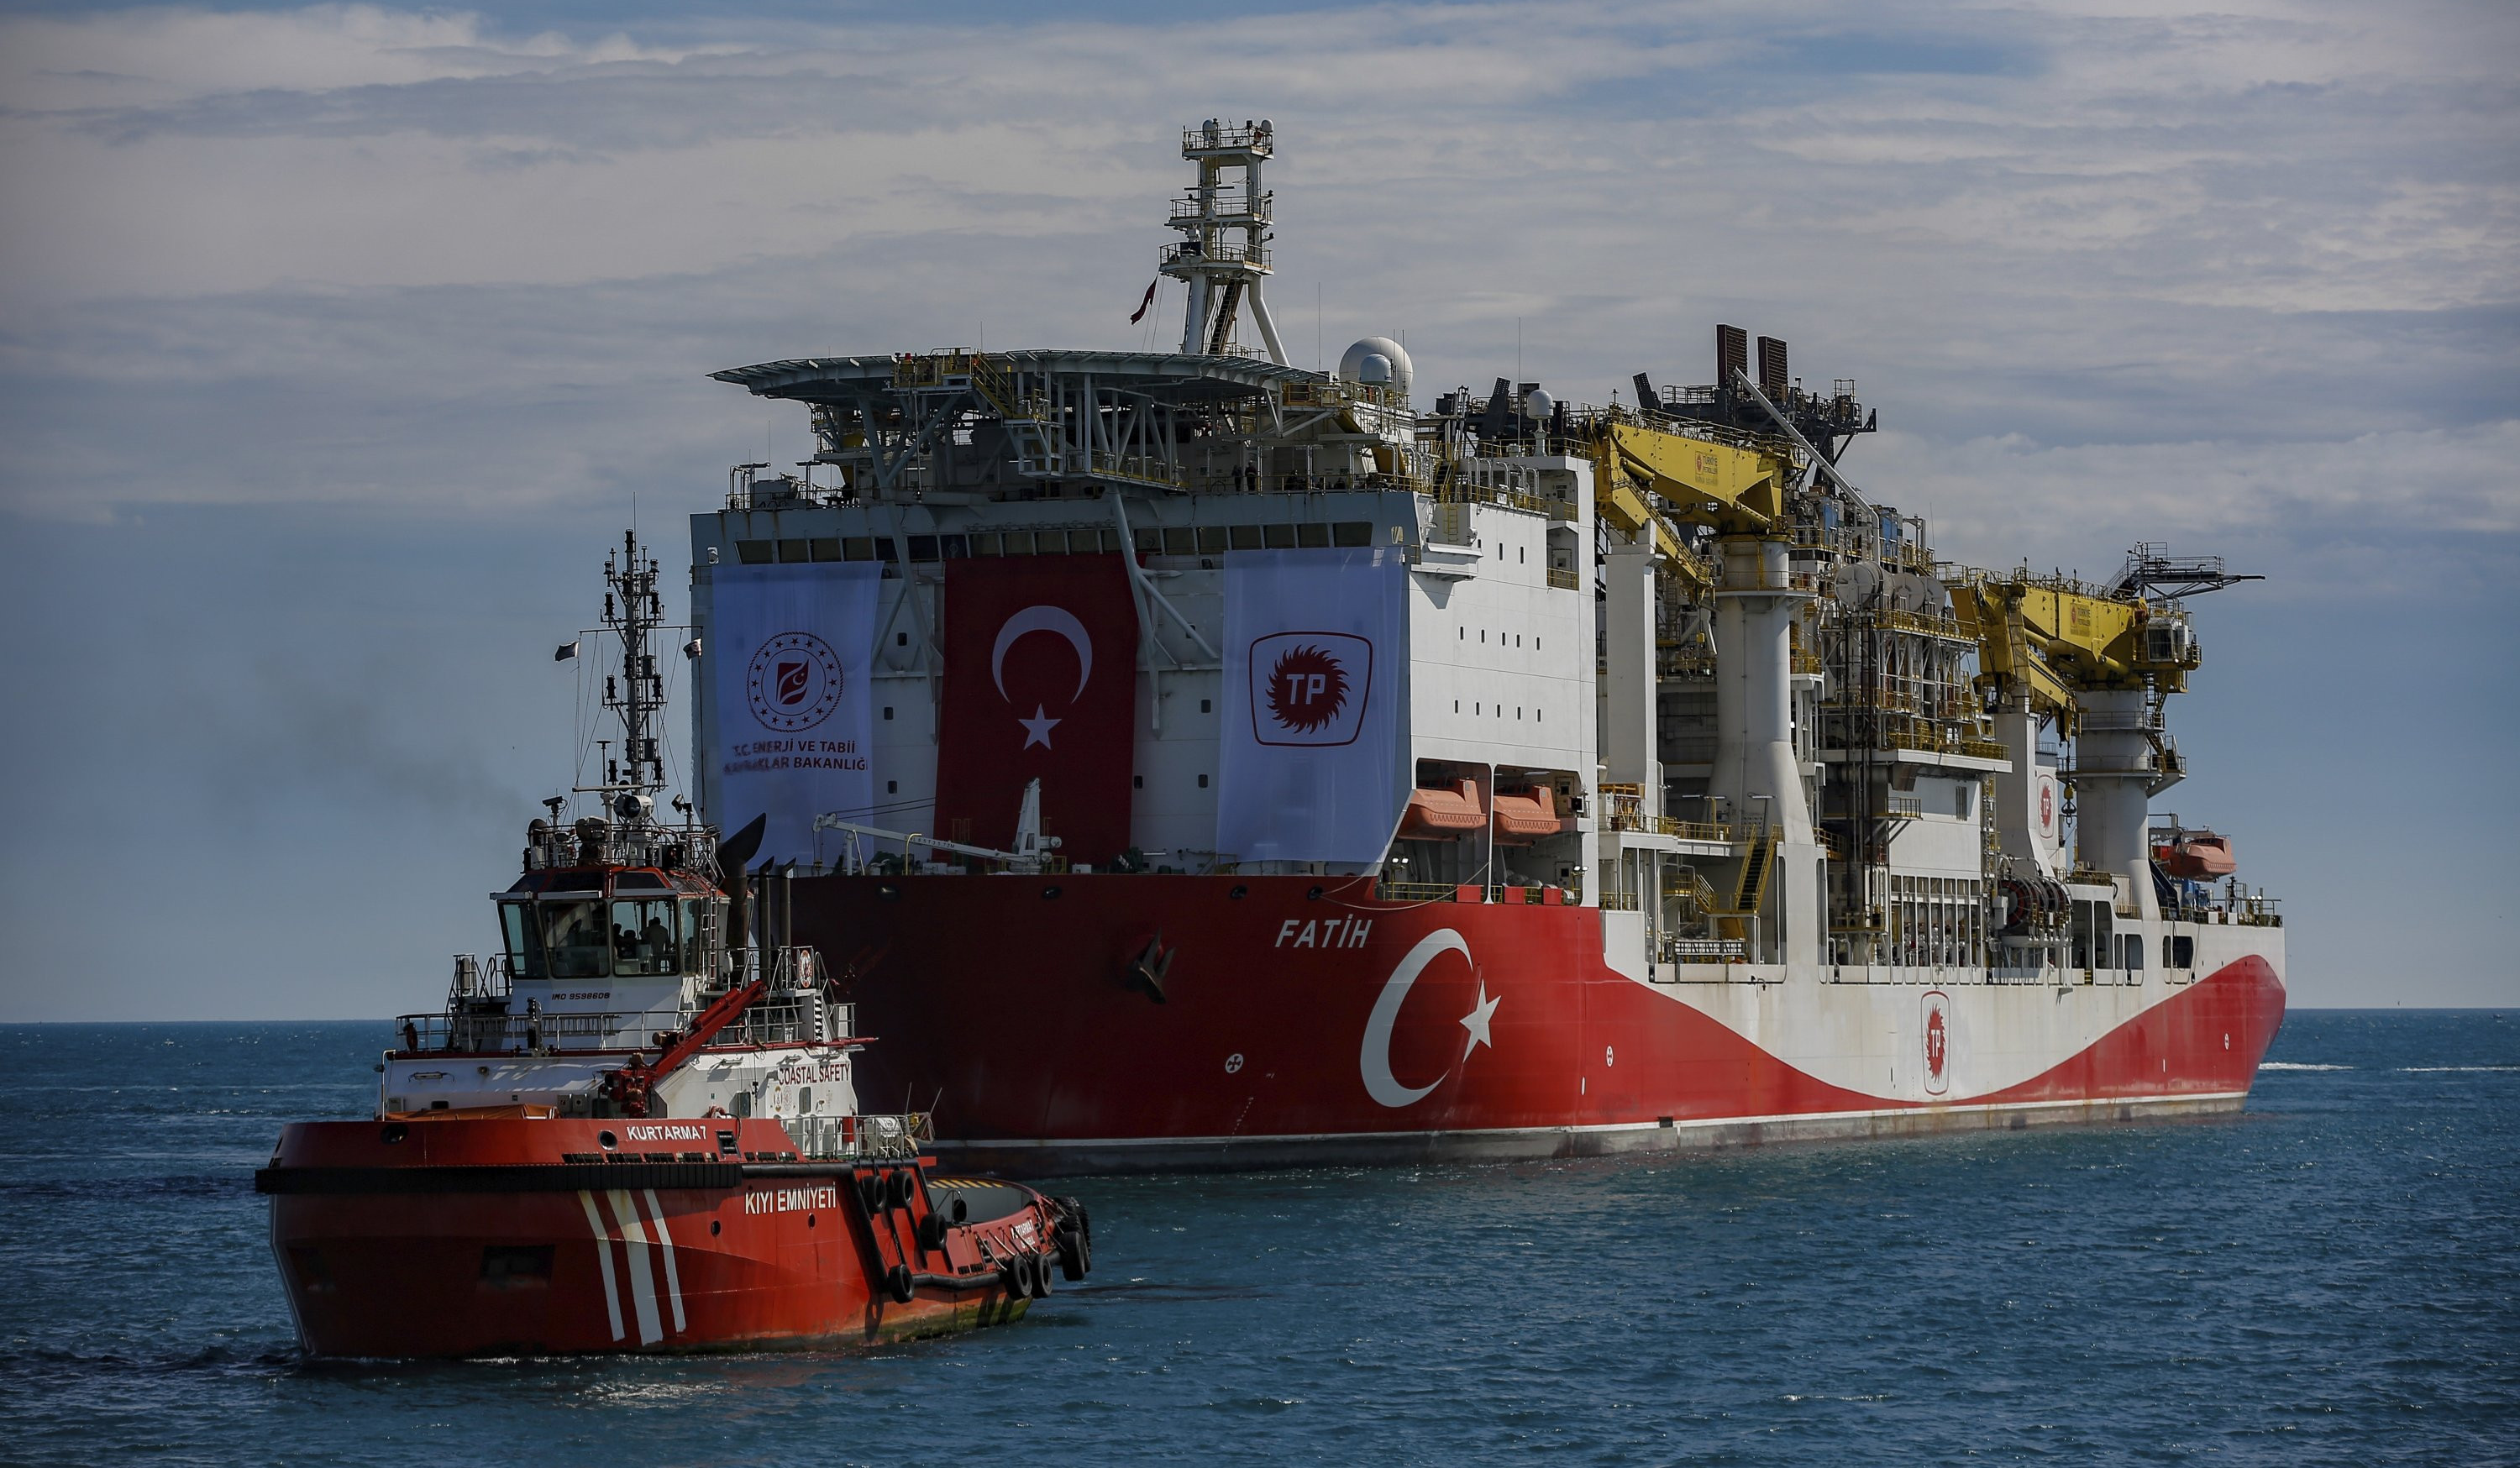 Gas production in Black Sea will allow providing about a third of Turkey’s needs by 2027